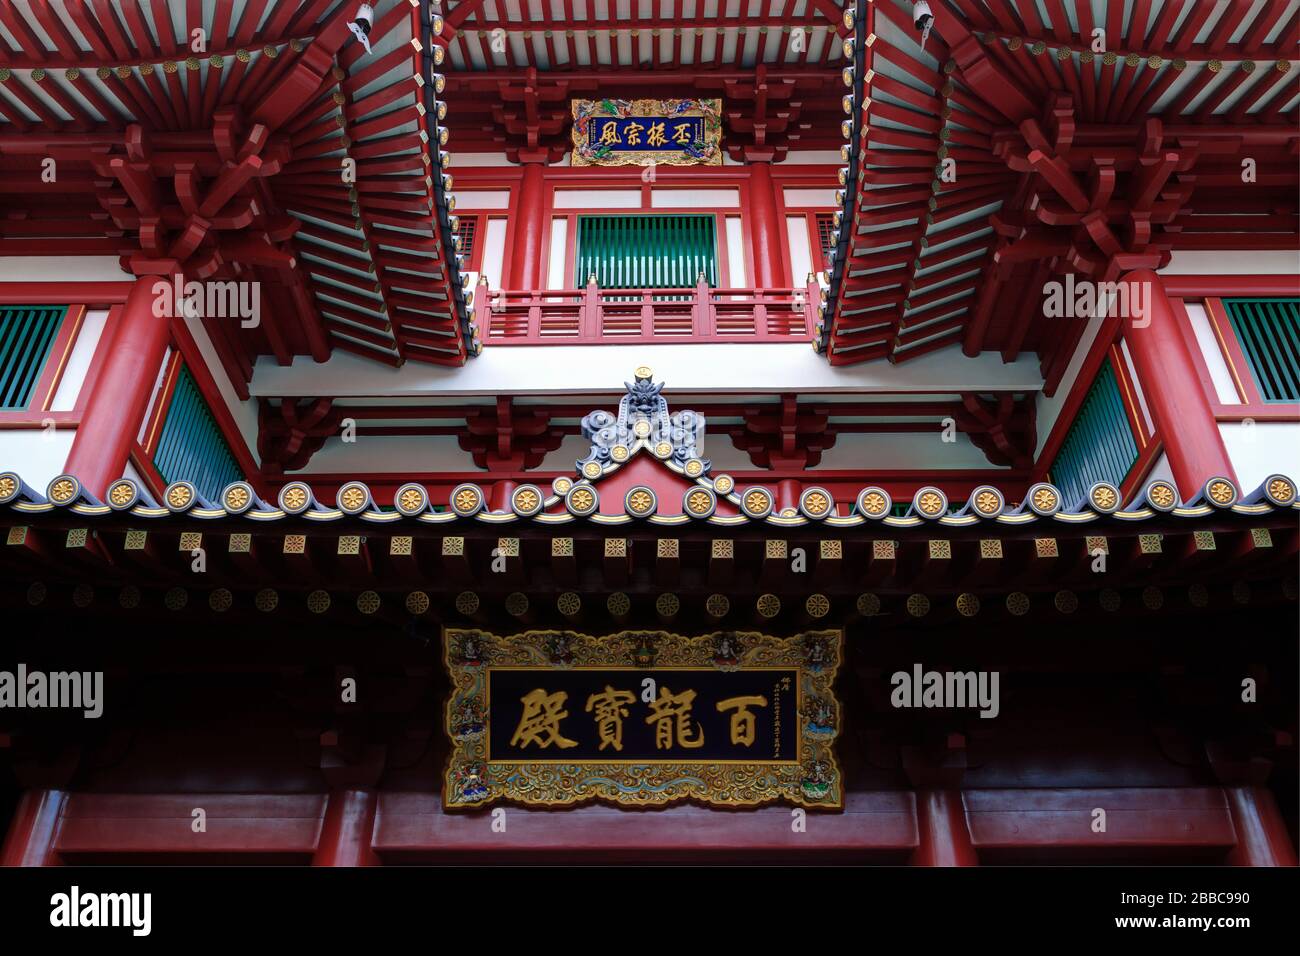 Buddha Tooth Relic Temple & Museum,Chinatown District,Singapore,Asia Stock Photo